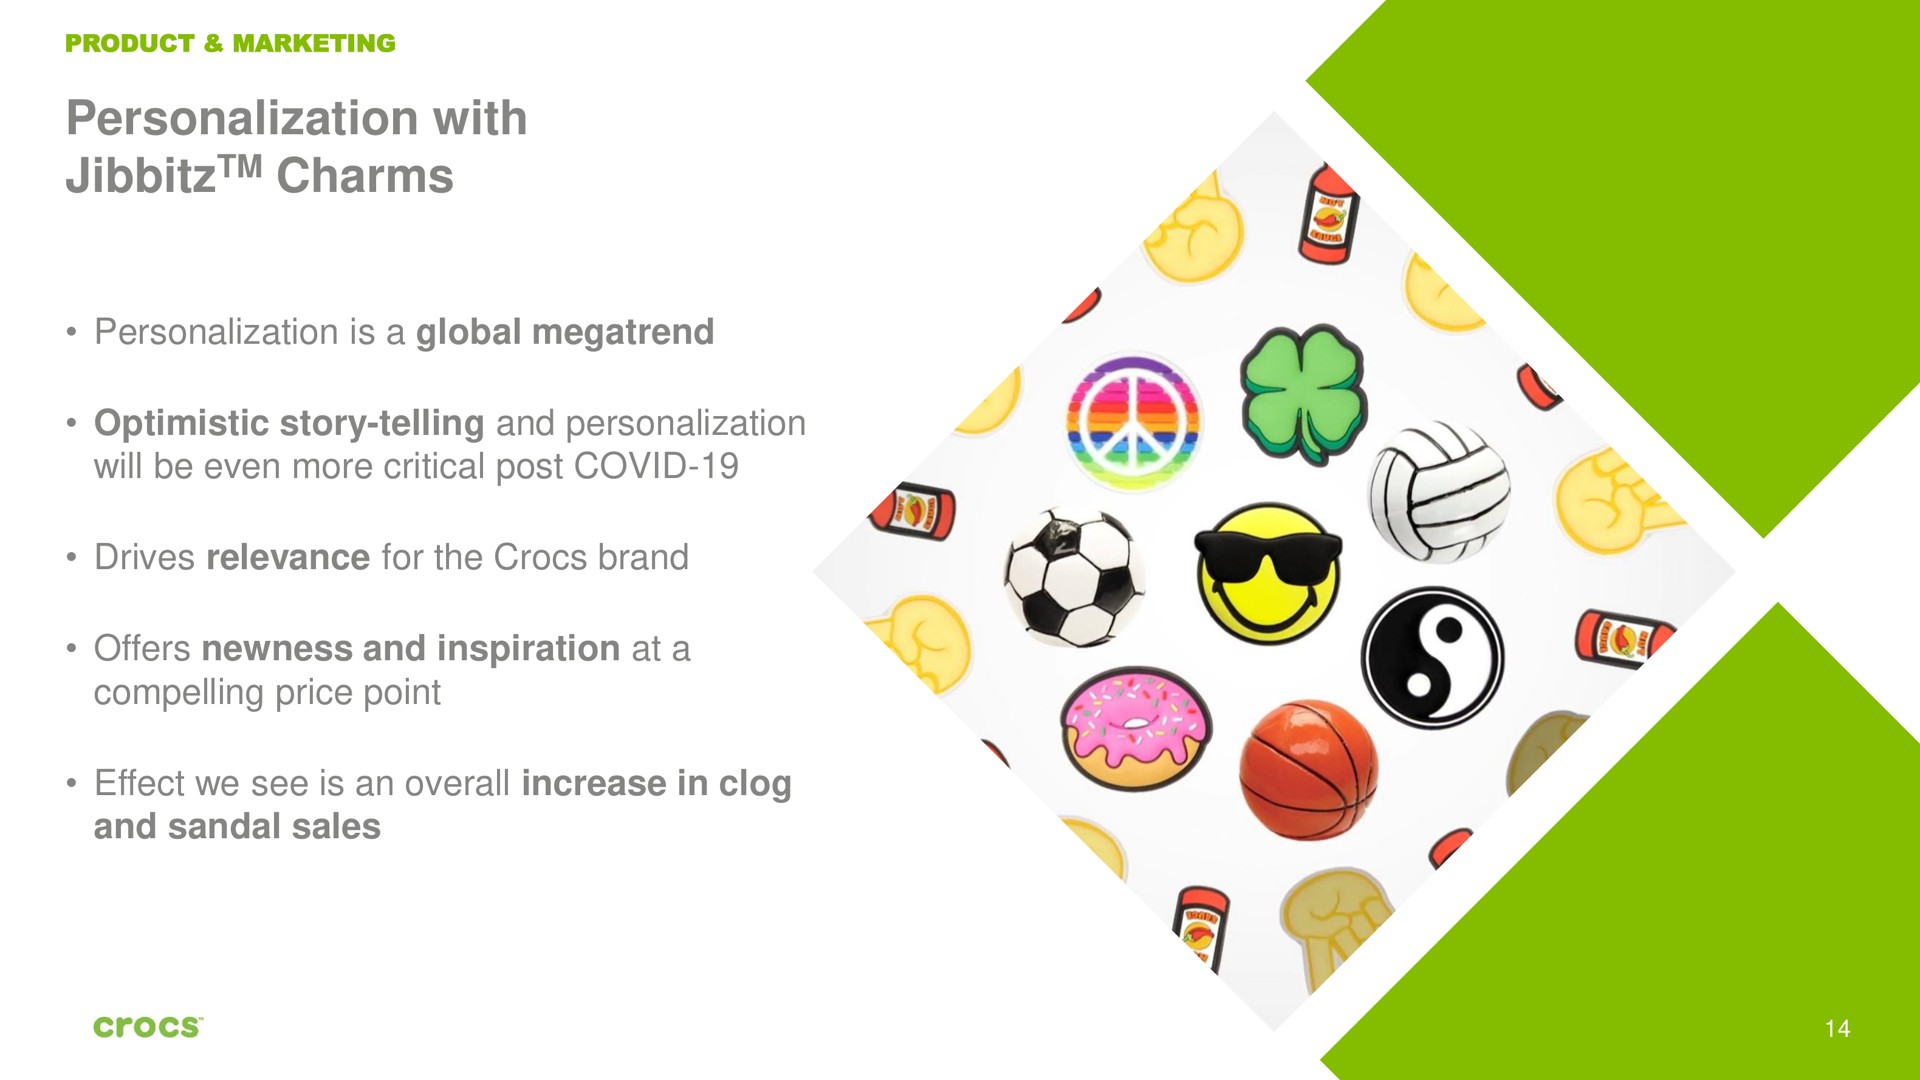 personalization with charms is a global optimistic story telling and will be even more critical post covid offers newness and inspiration at a effect we see is an overall increase in clog compelling price point and sandal sales | Crocs